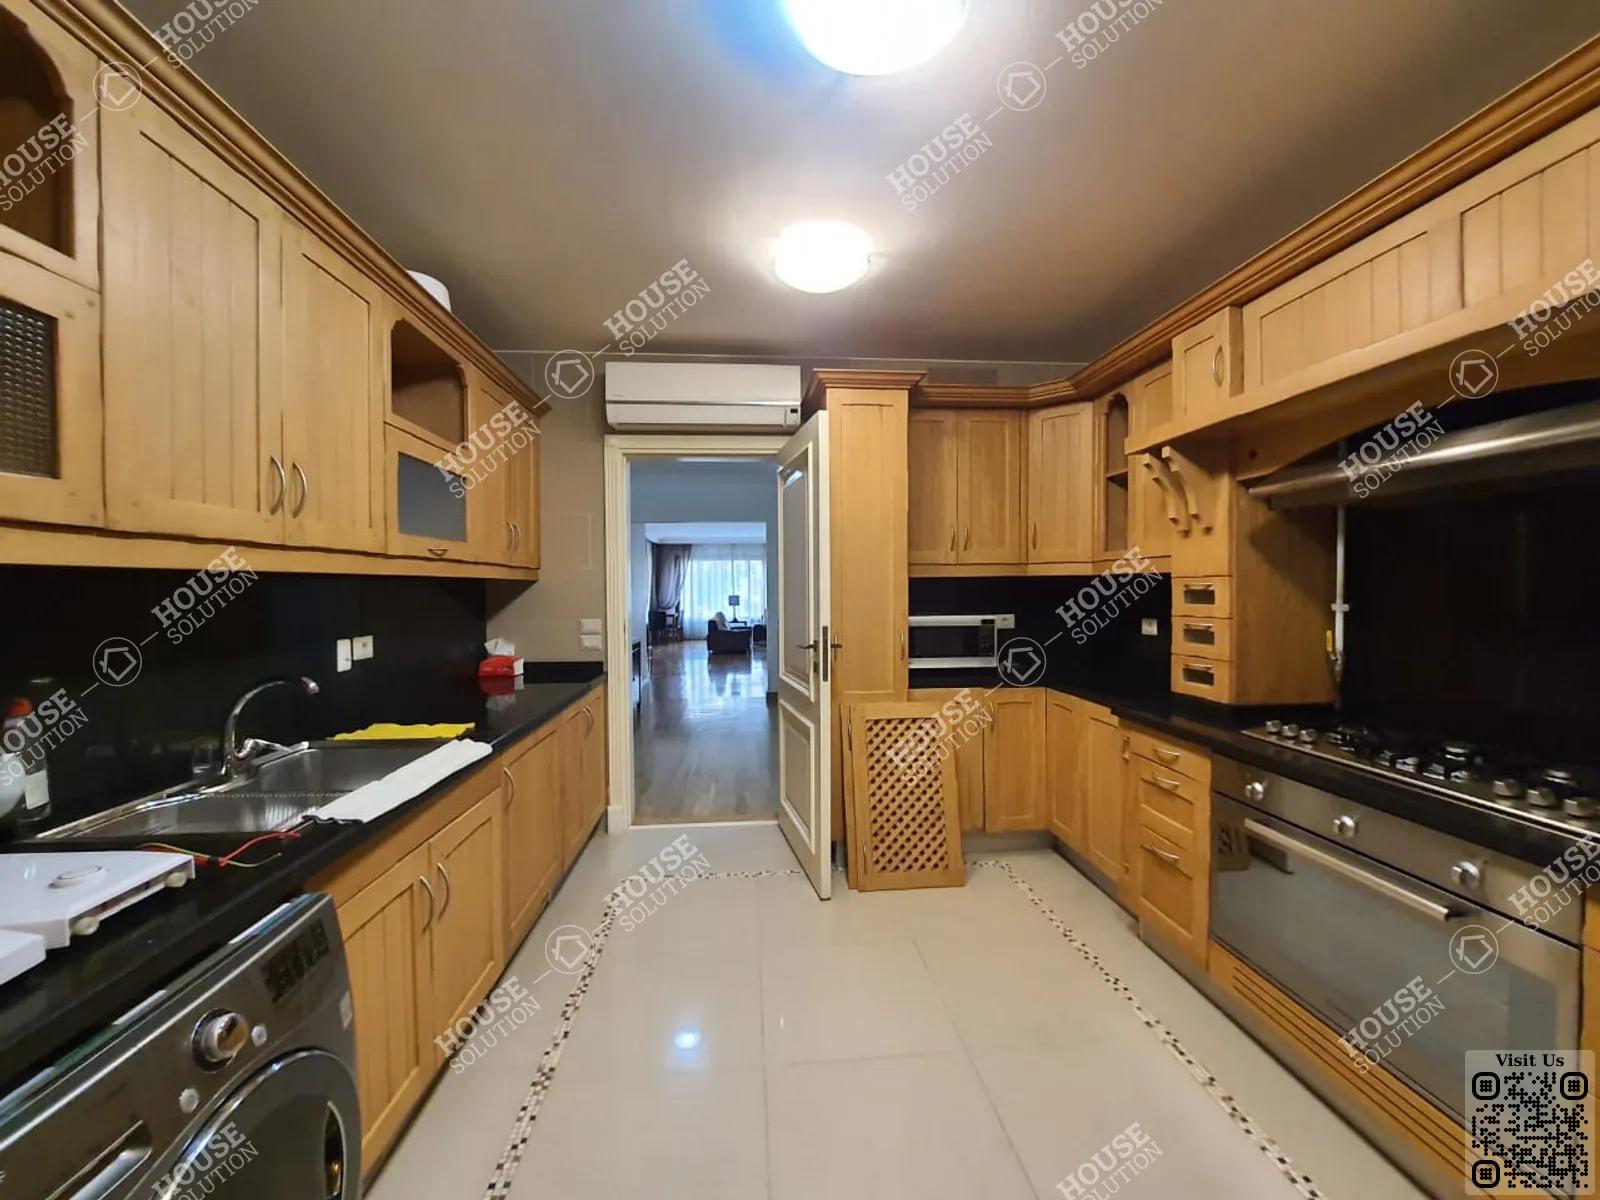 KITCHEN  @ Apartments For Rent In Maadi Maadi Sarayat Area: 350 m² consists of 4 Bedrooms 3 Bathrooms Modern furnished 5 stars #5047-1